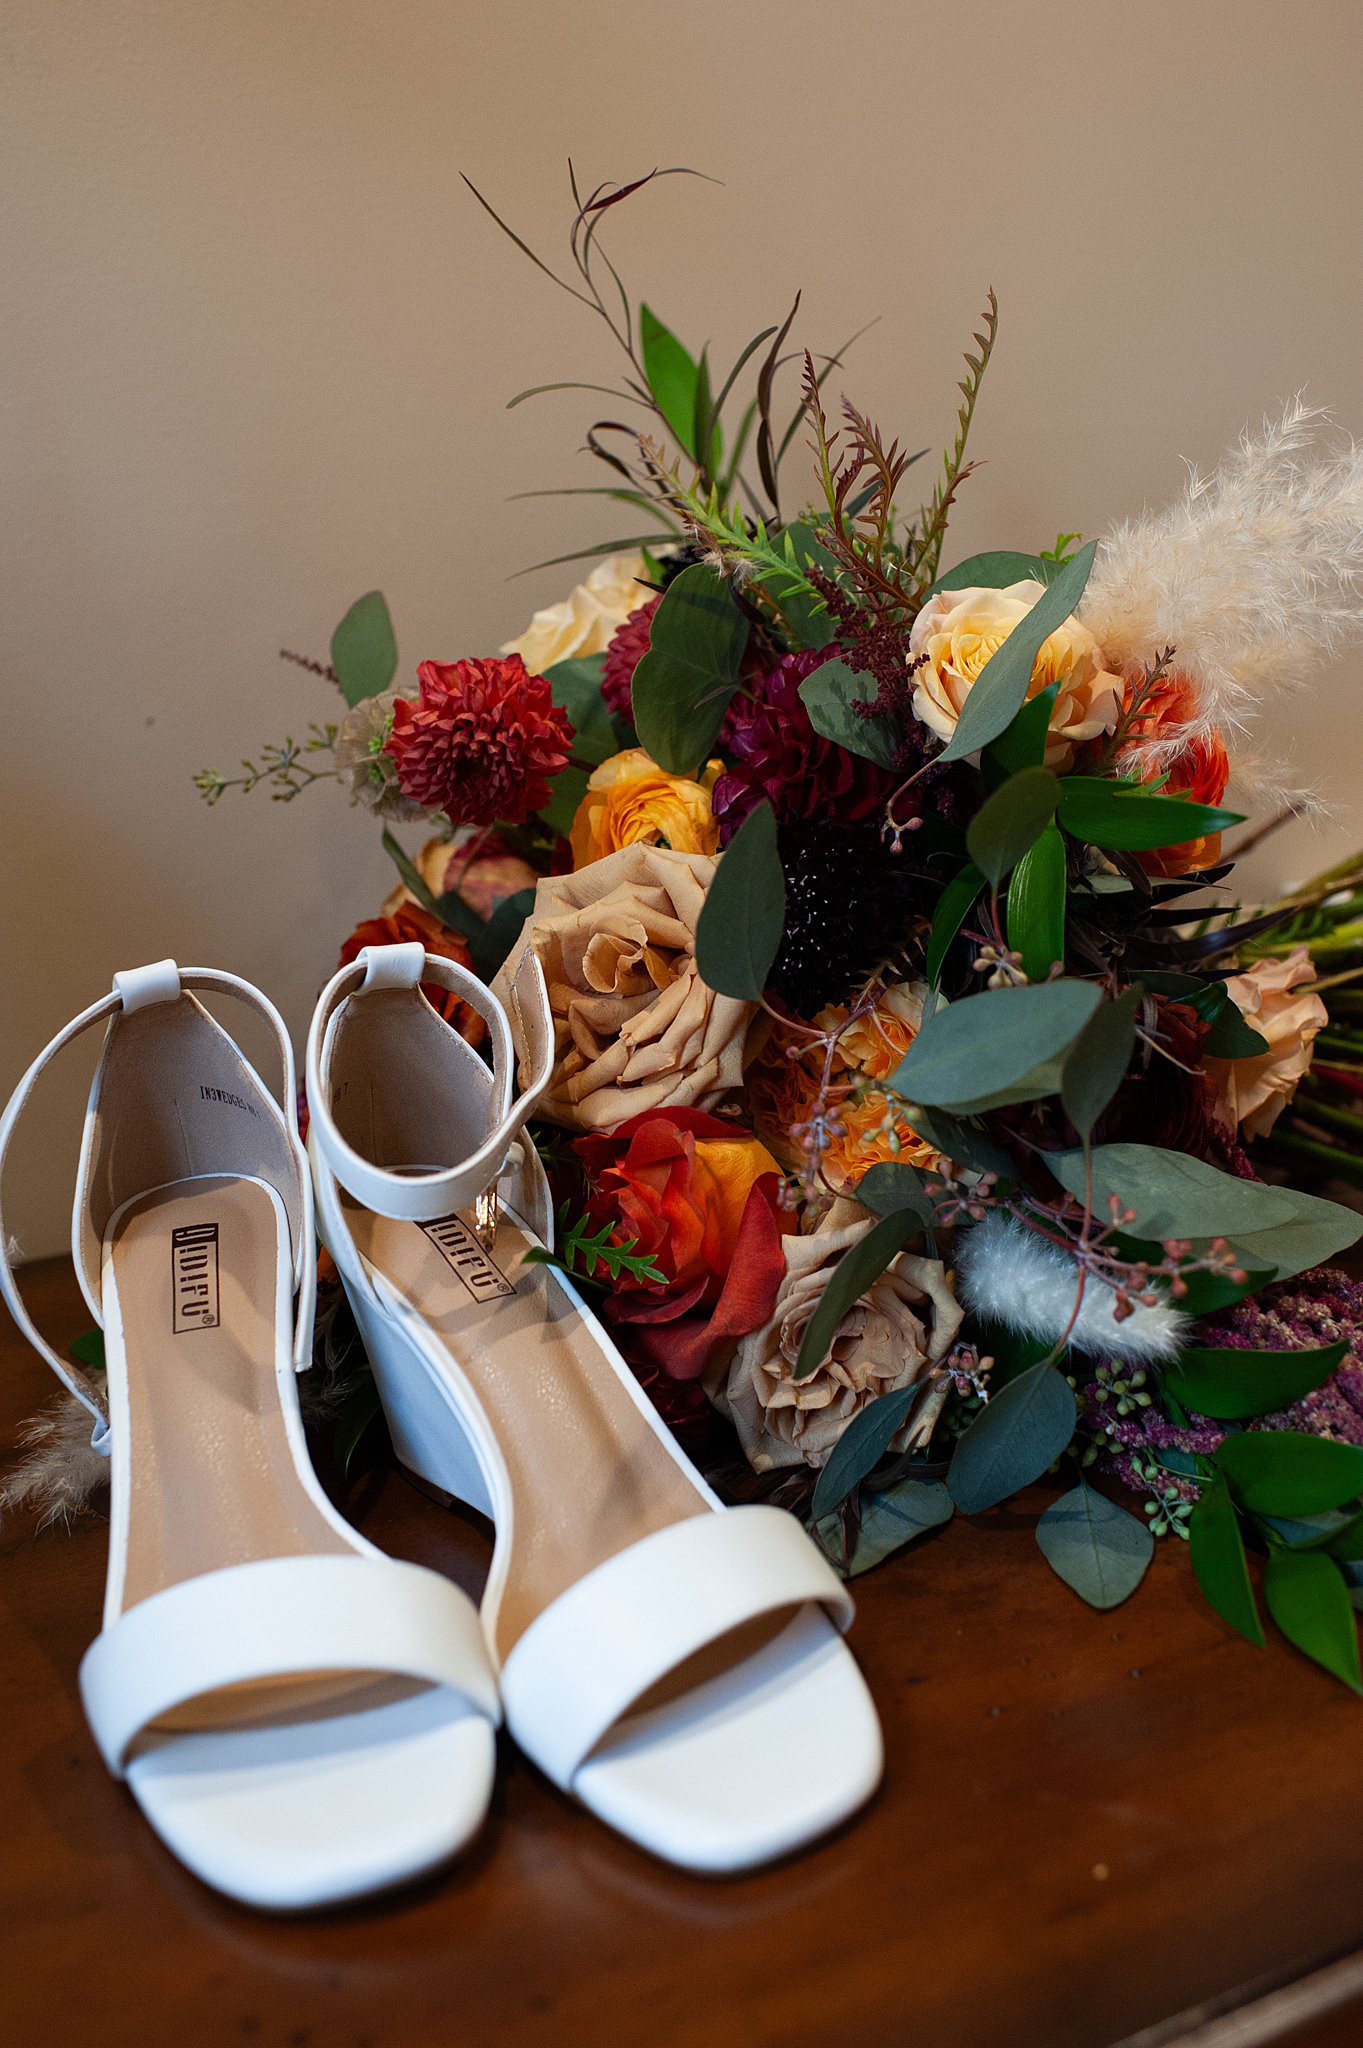 Details of shoes and a bouquet sitting on a wood table